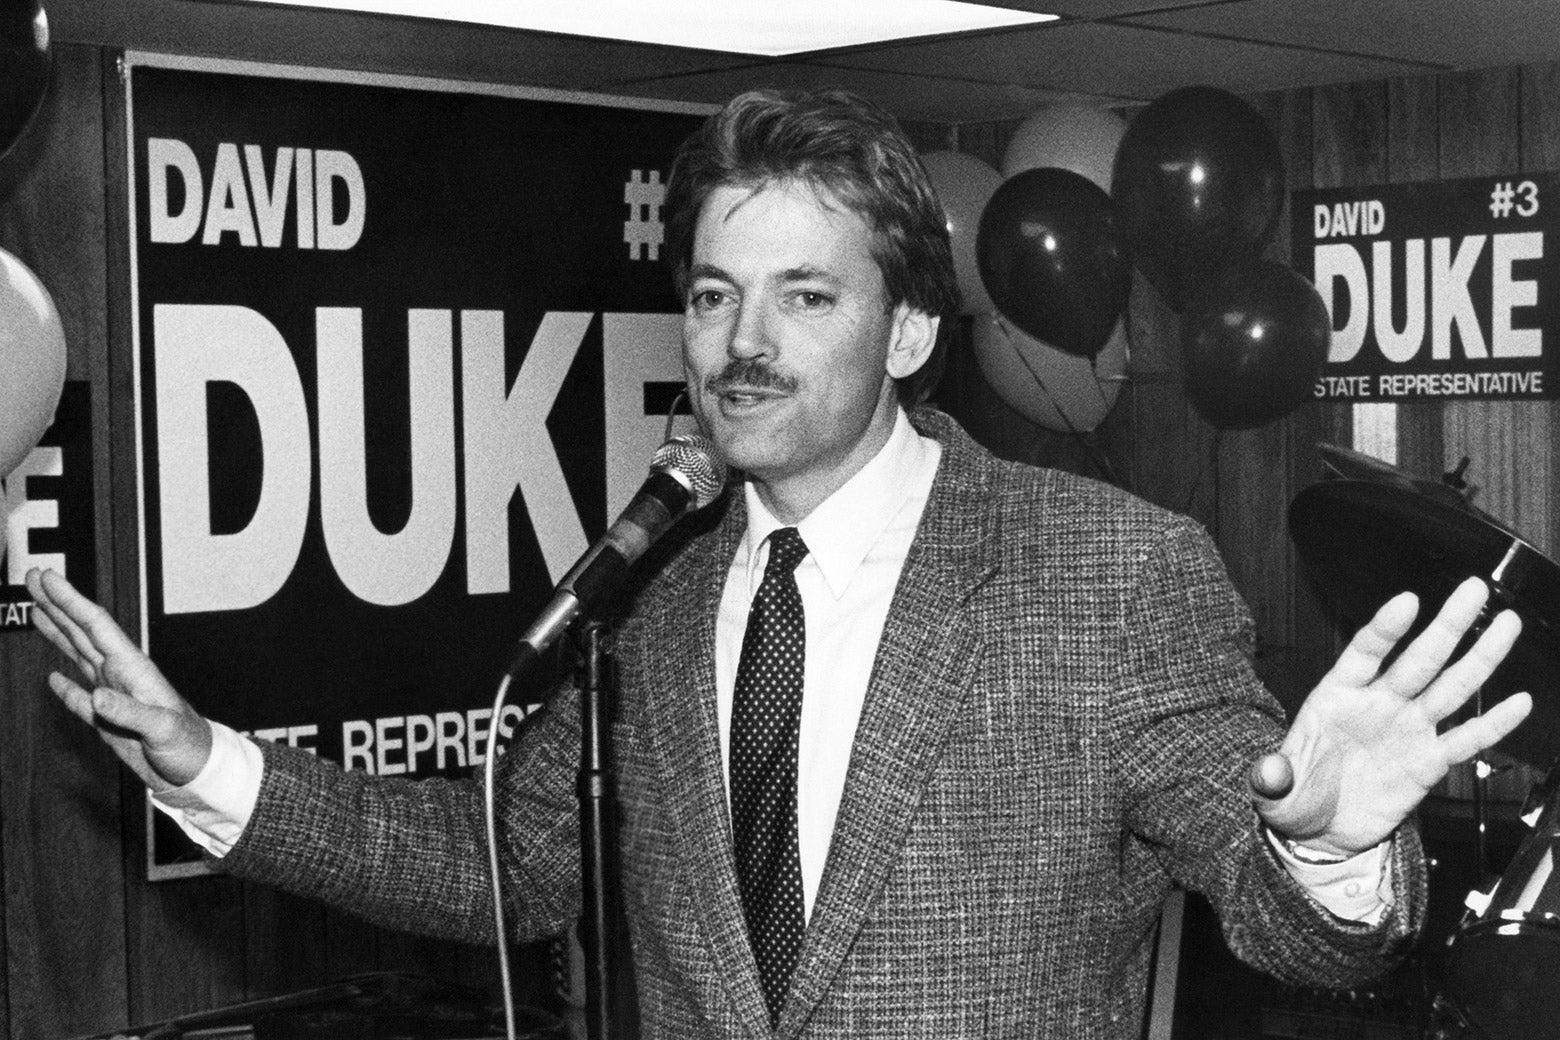 David Duke at a microphone in a suit and tie with campaign signs and balloons behind him